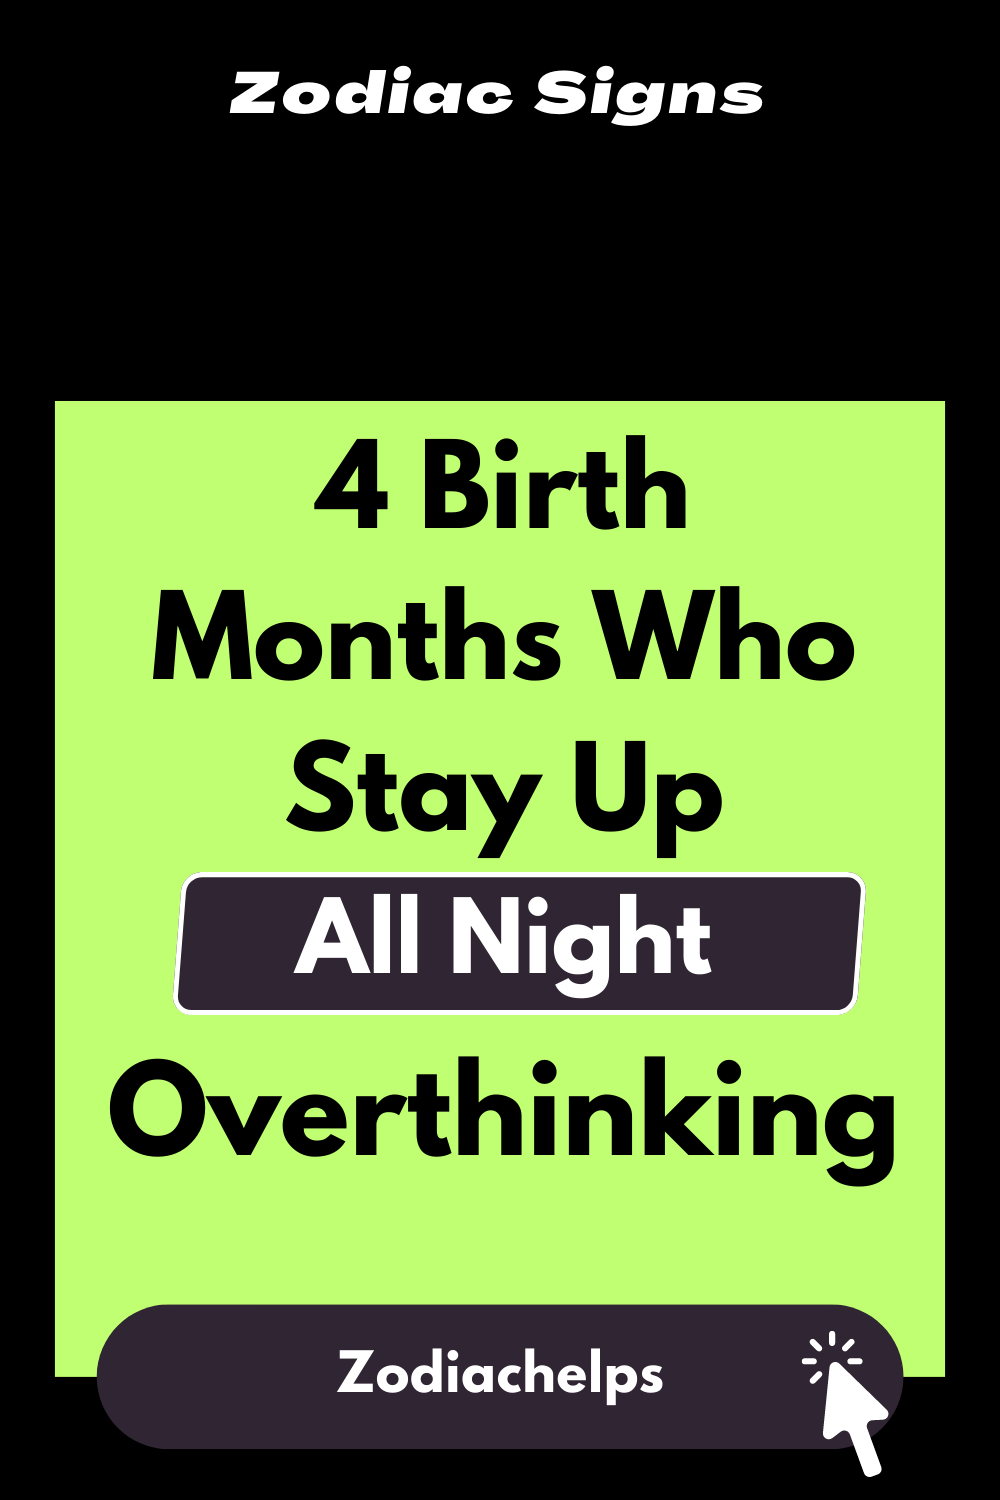 4 Birth Months Who Stay Up All Night, Overthinking